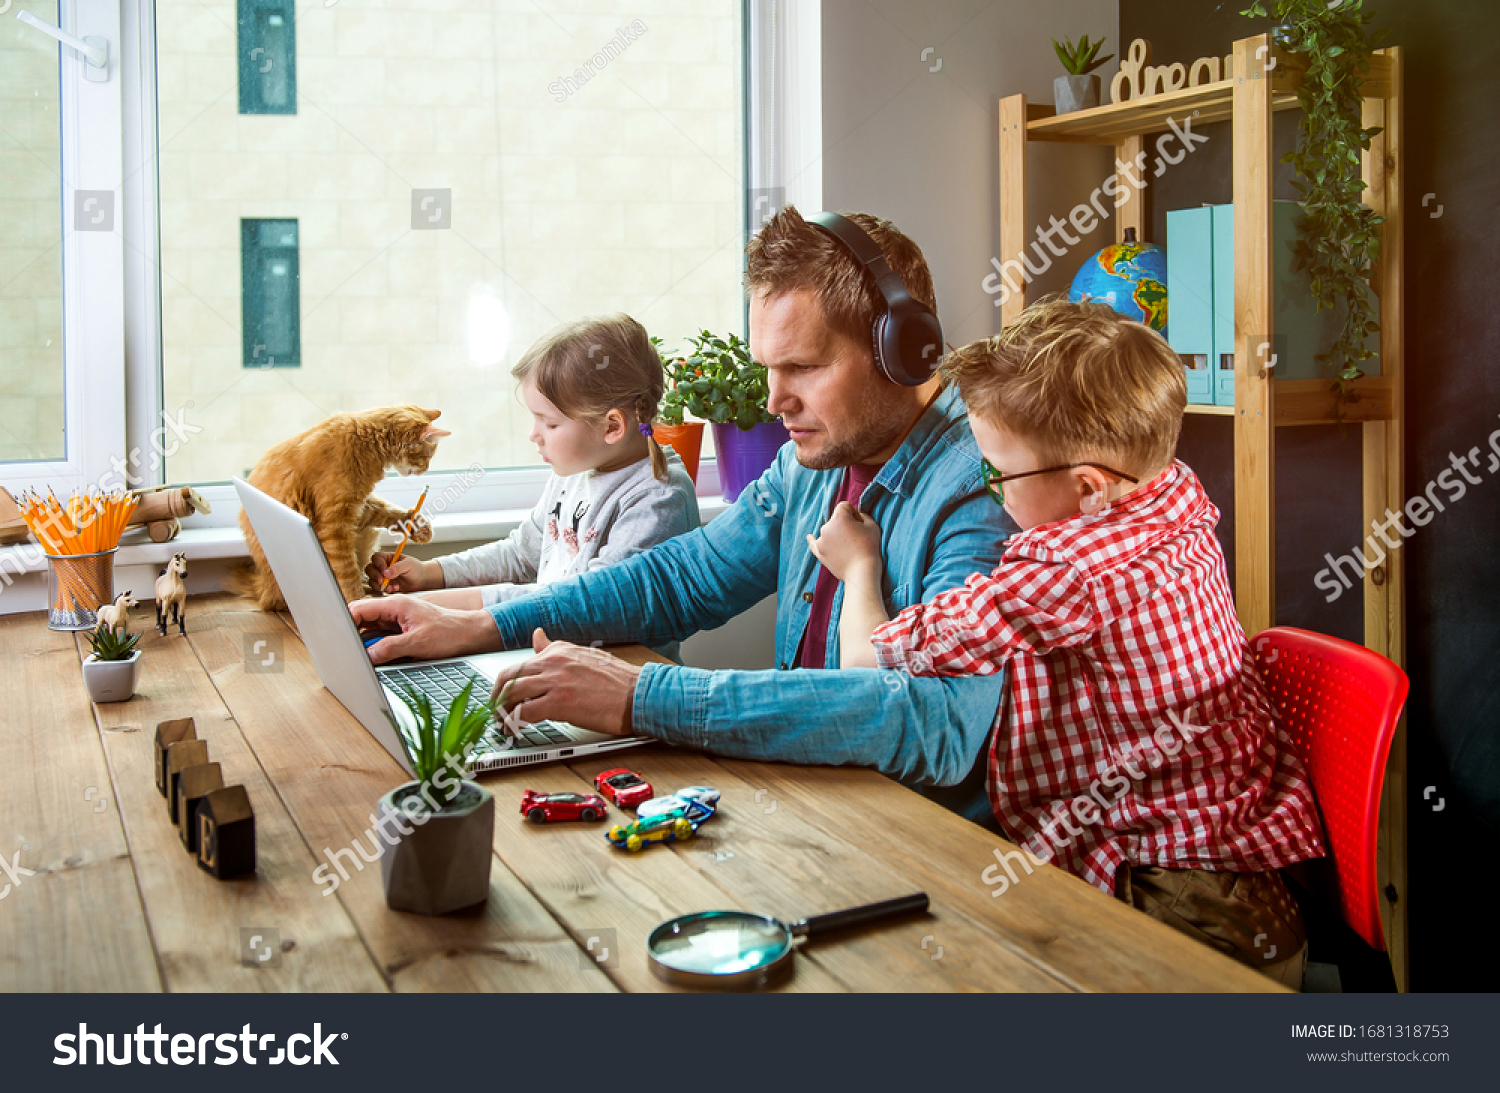 Work from home. Man works on laptop with children playing around. Family together with pet cat on table #1681318753